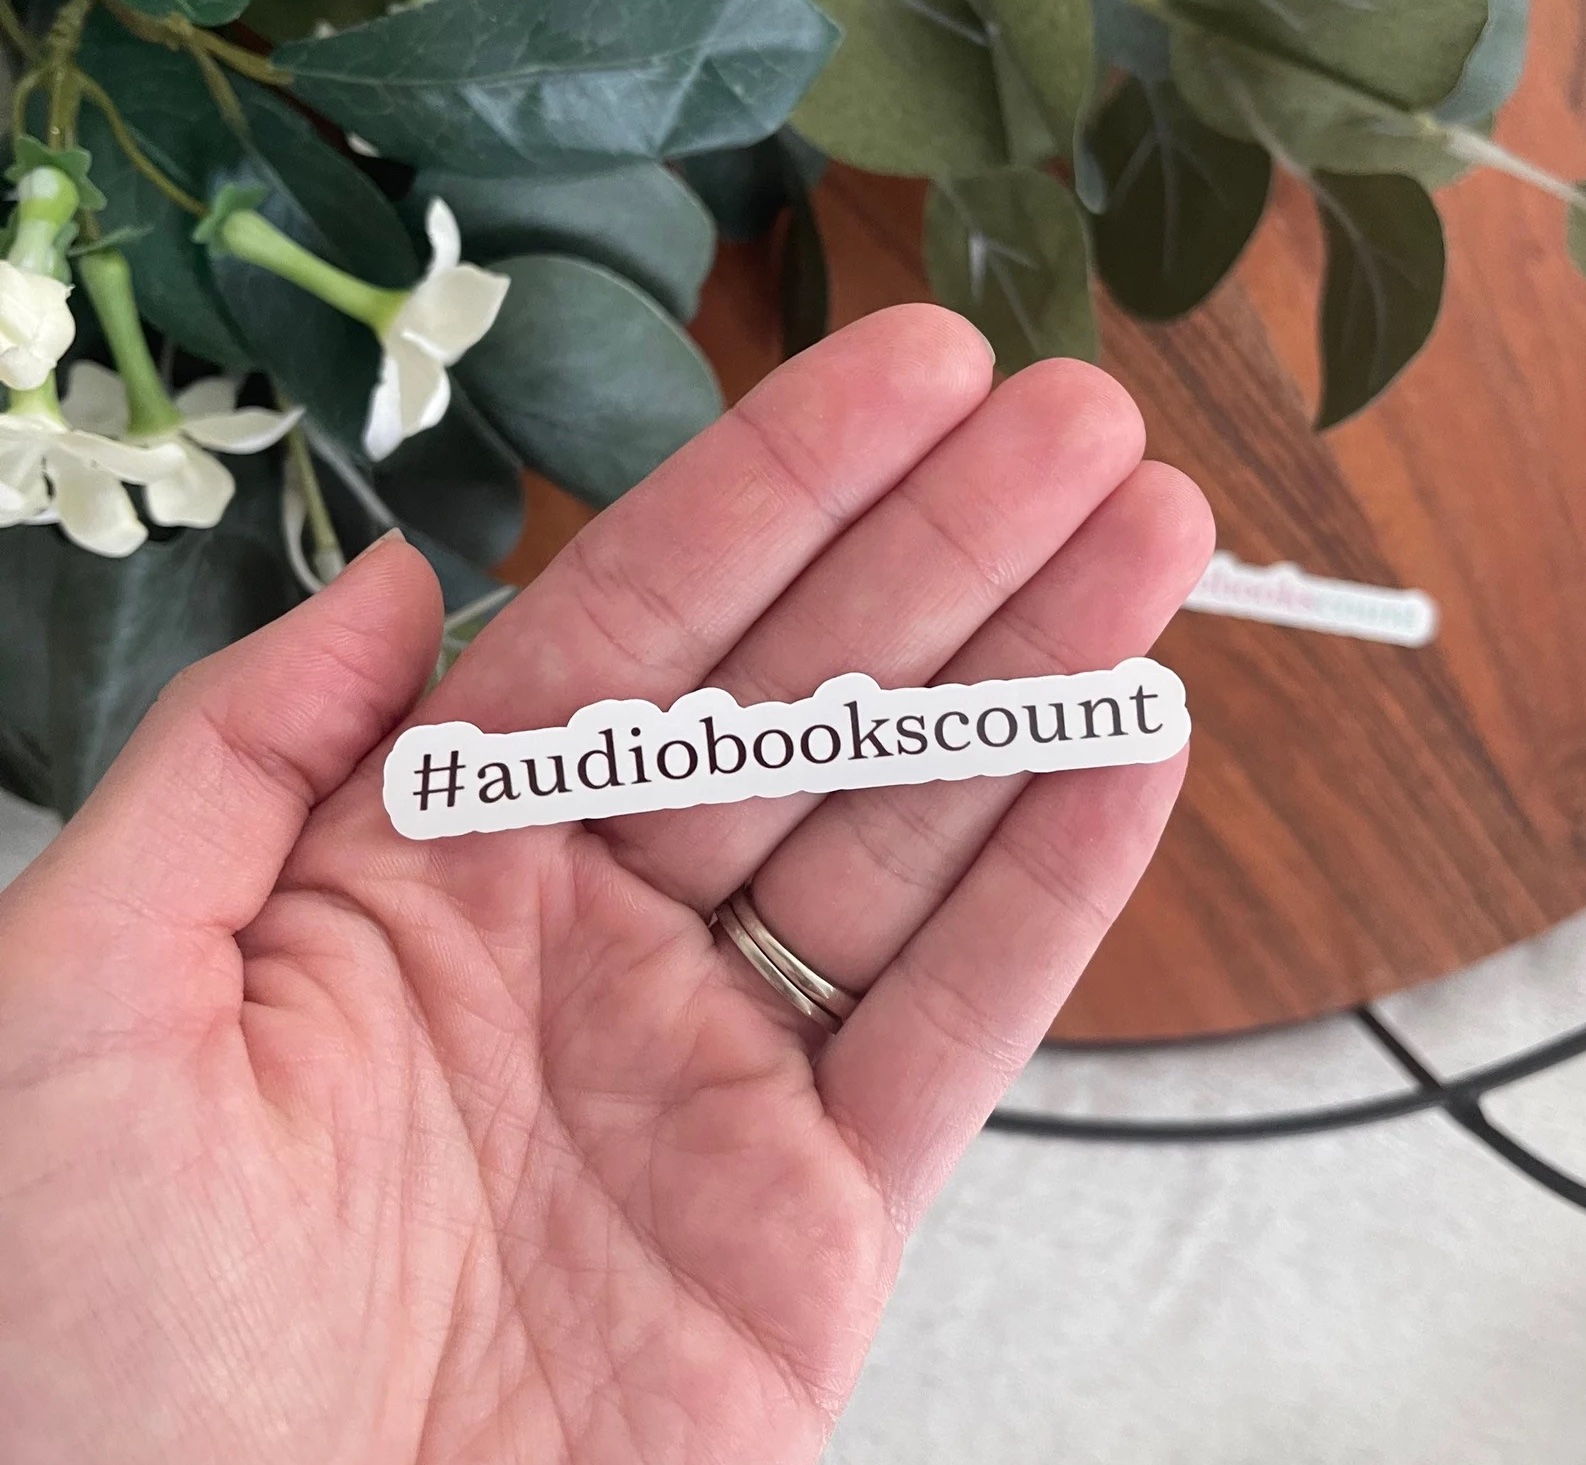 A photo of a sticking that says #AudiobooksCount